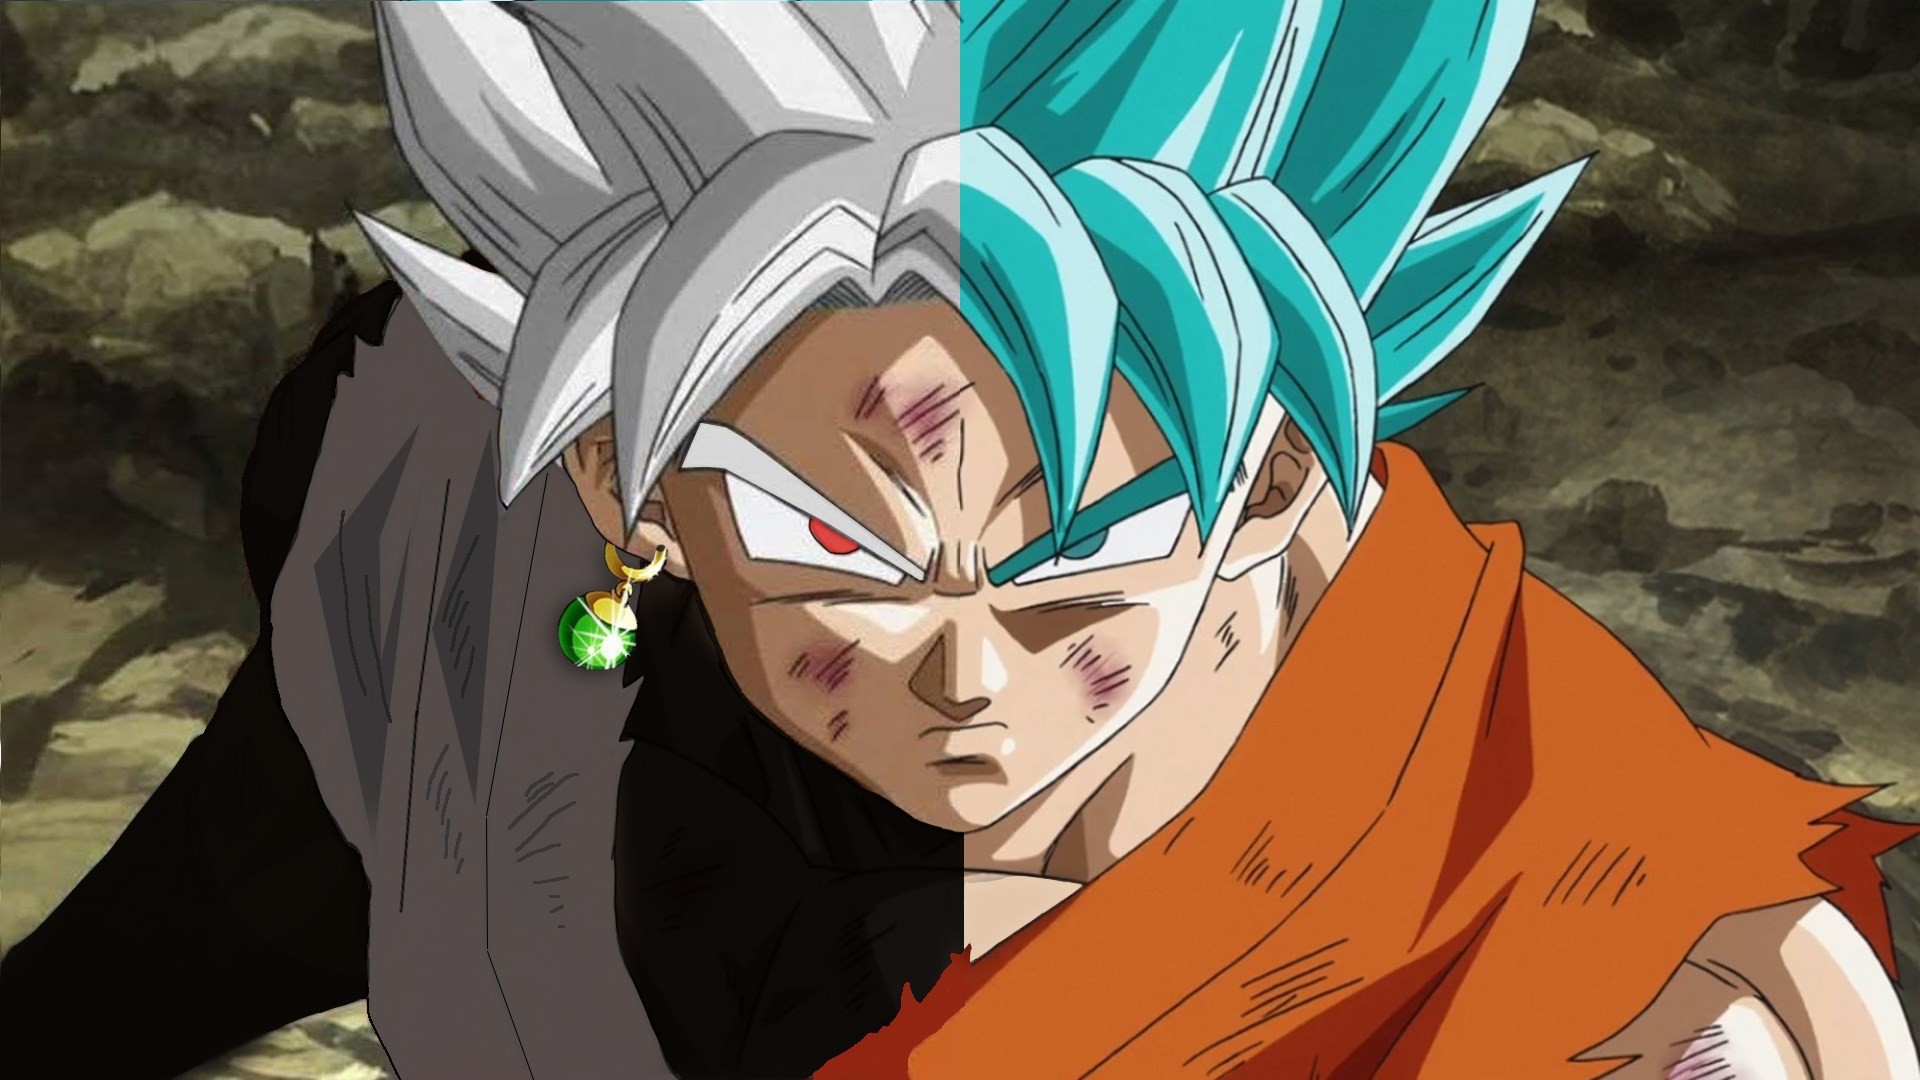 1920x1080 free wallpaper and screensavers for dragon ball super